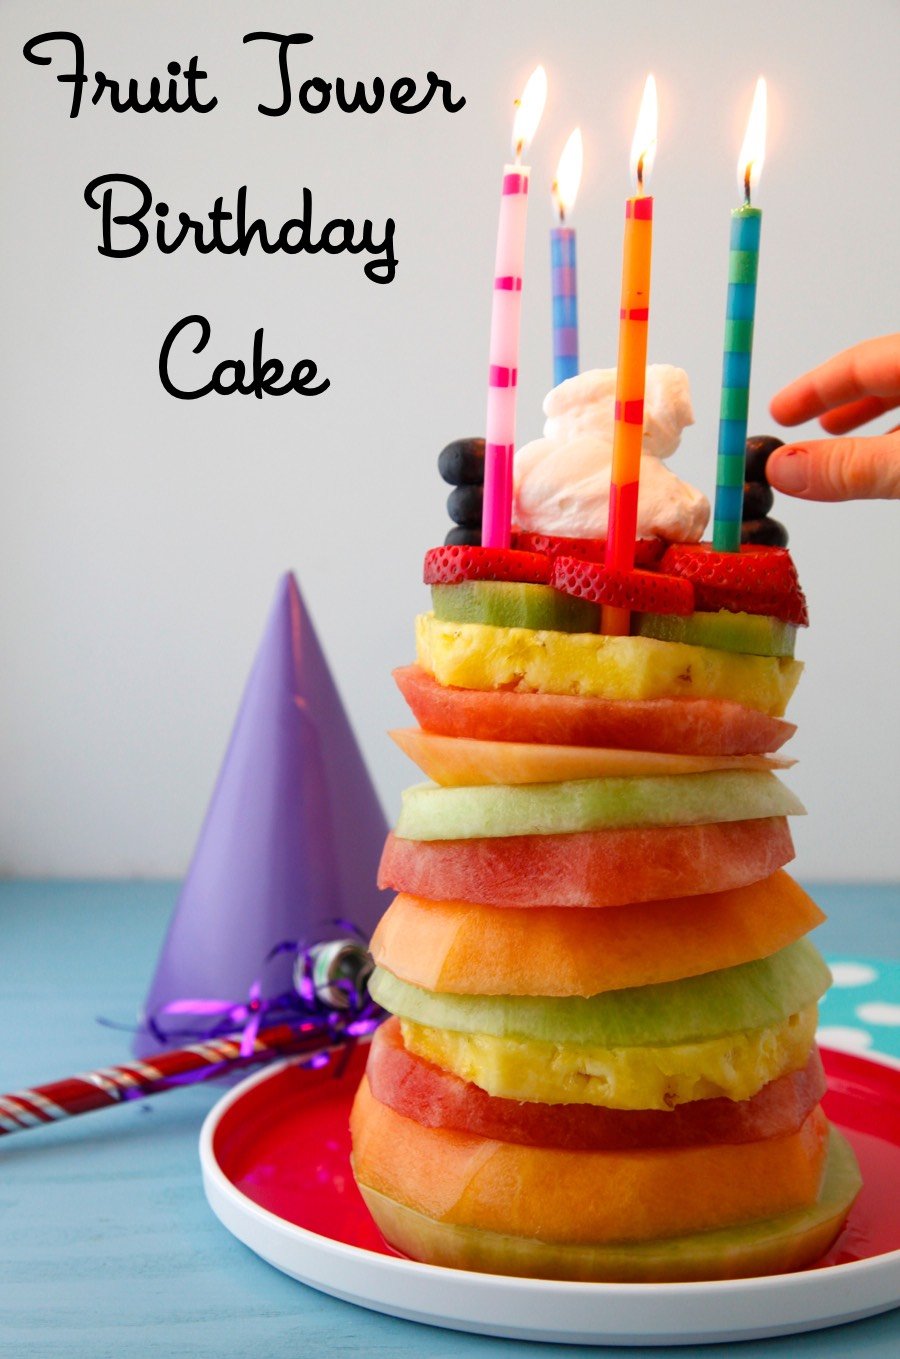 Fruit Tower Healthy Birthday Cake from Weelicious